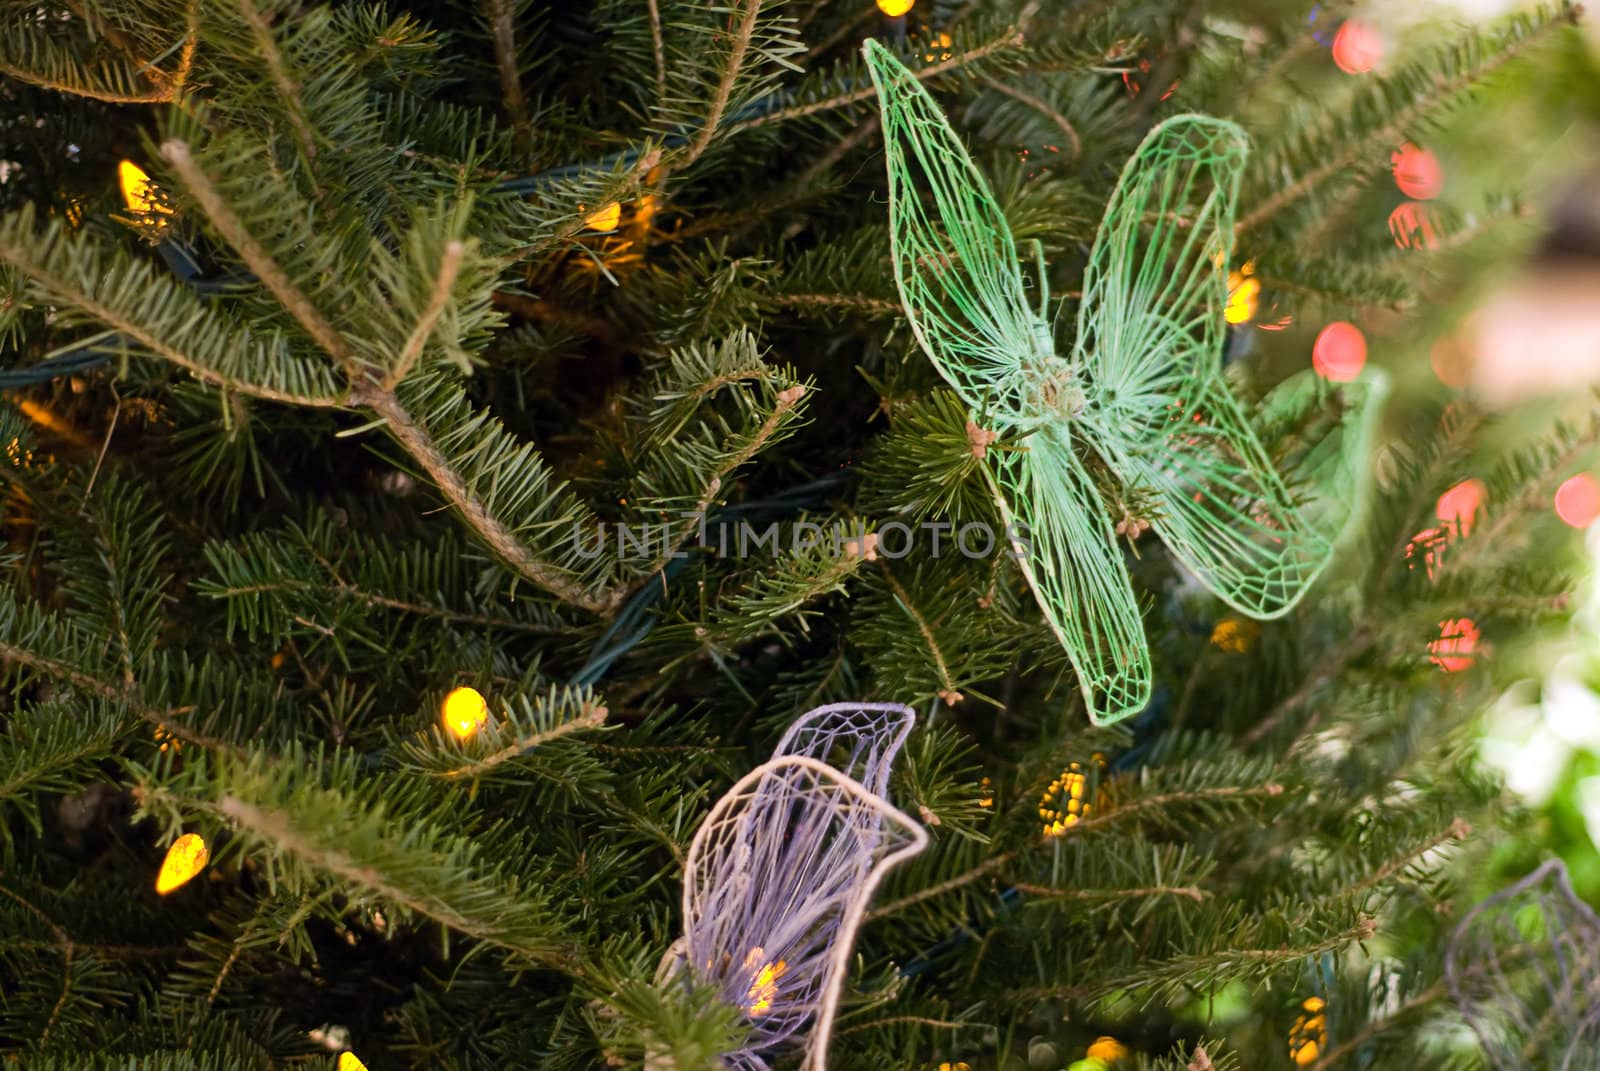 Some butterflies used as christmas decorations on a pine tree